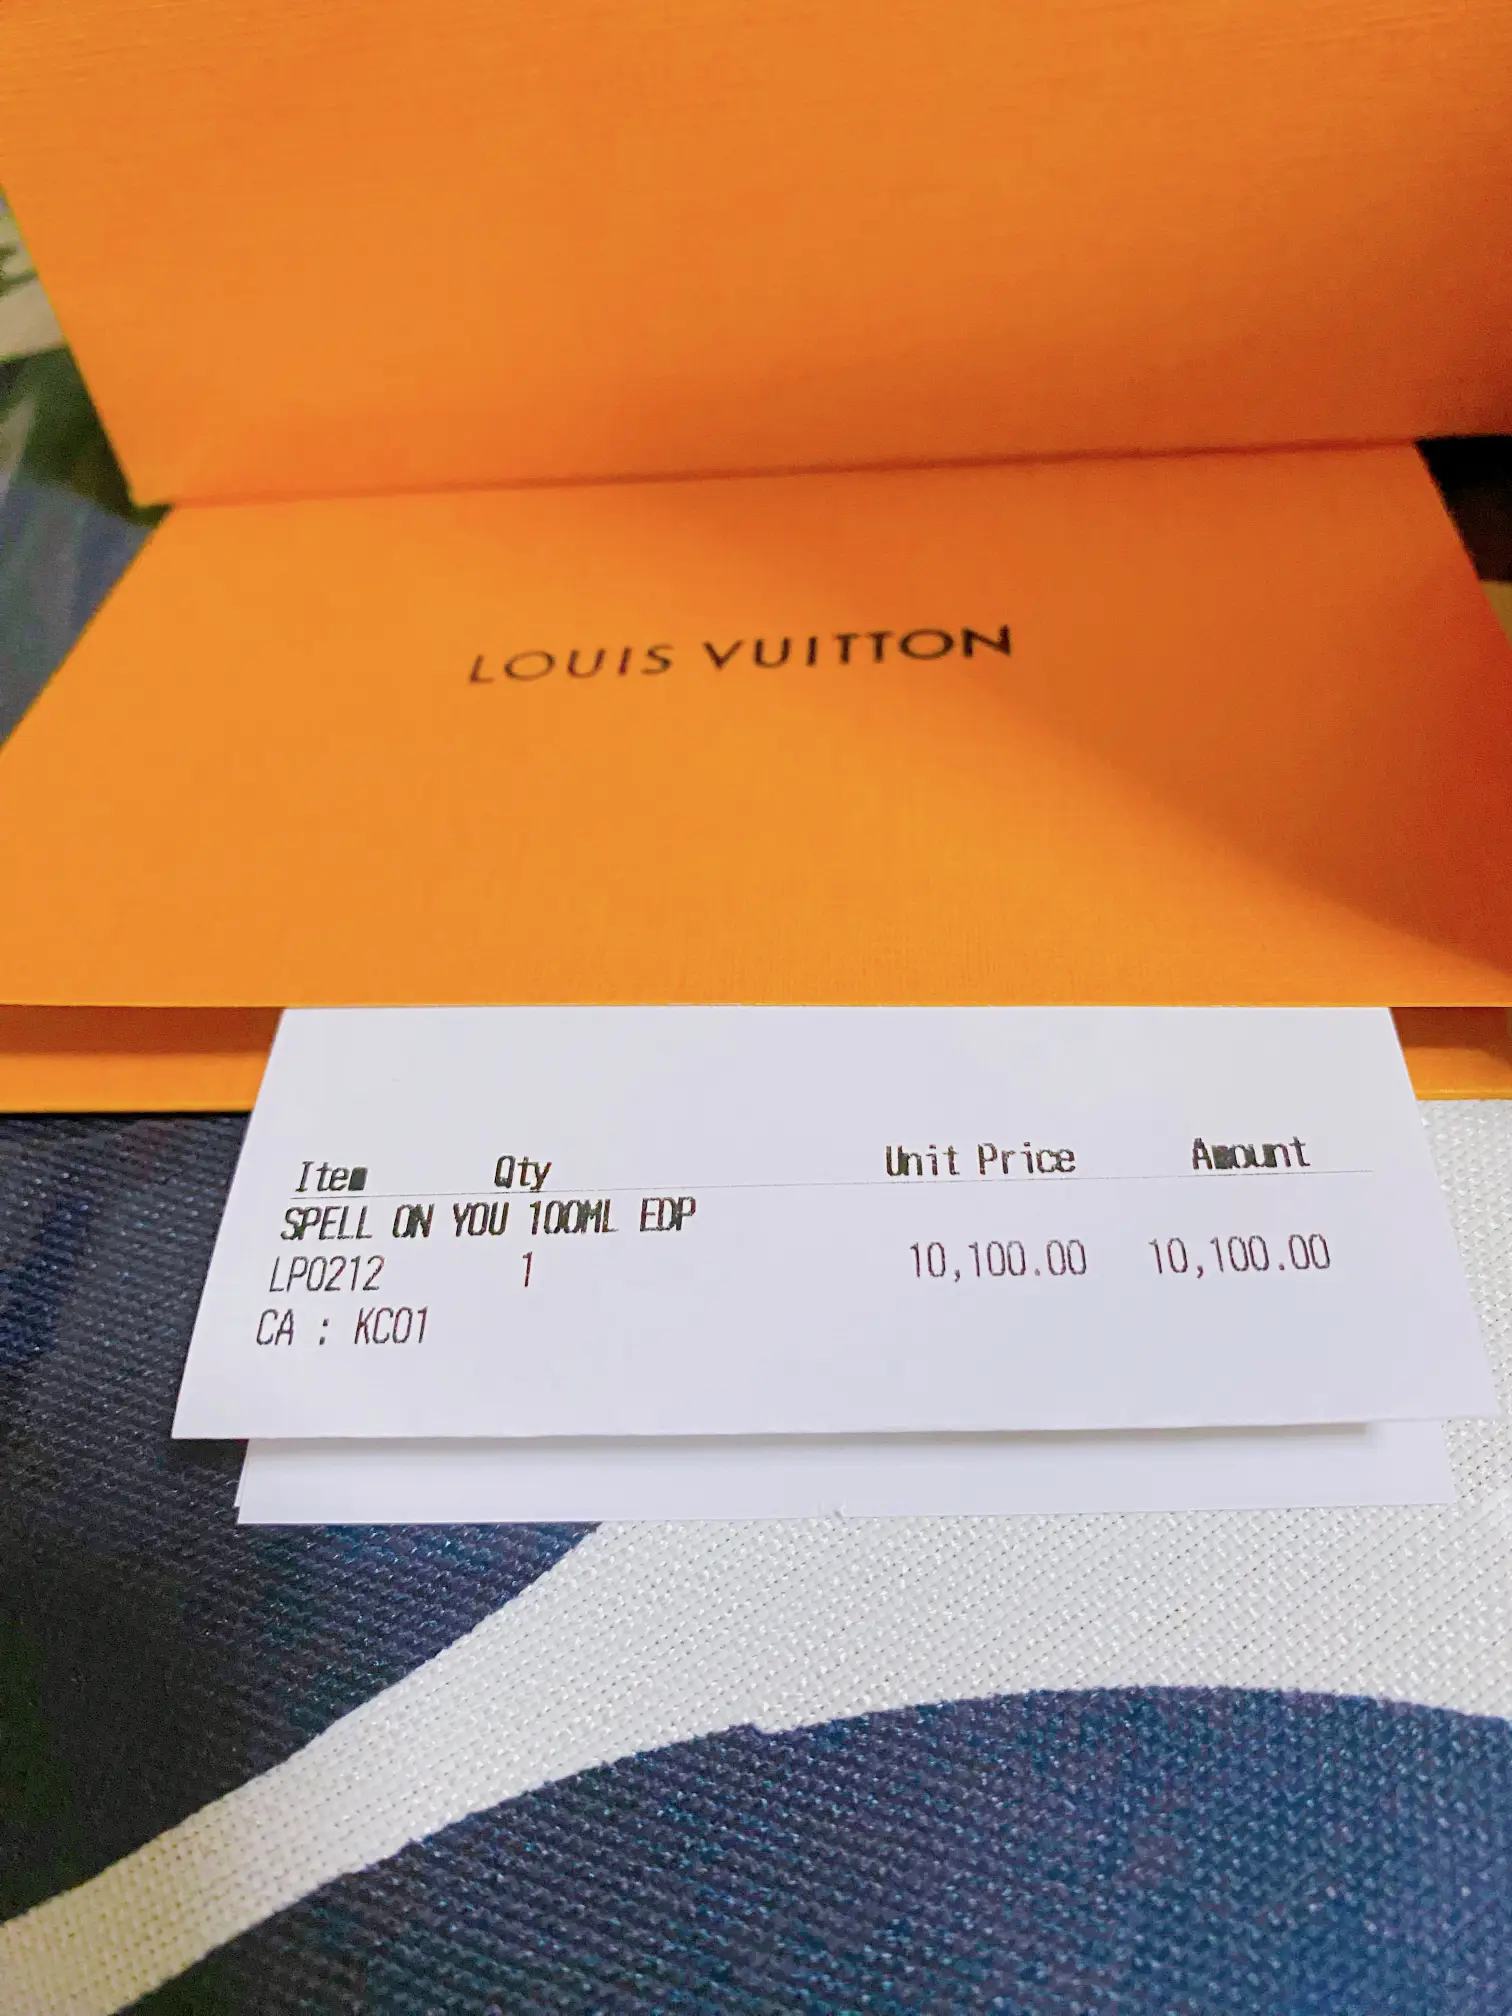 Louis Vuitton Spell on you, Louis Vuitton Spell on you review